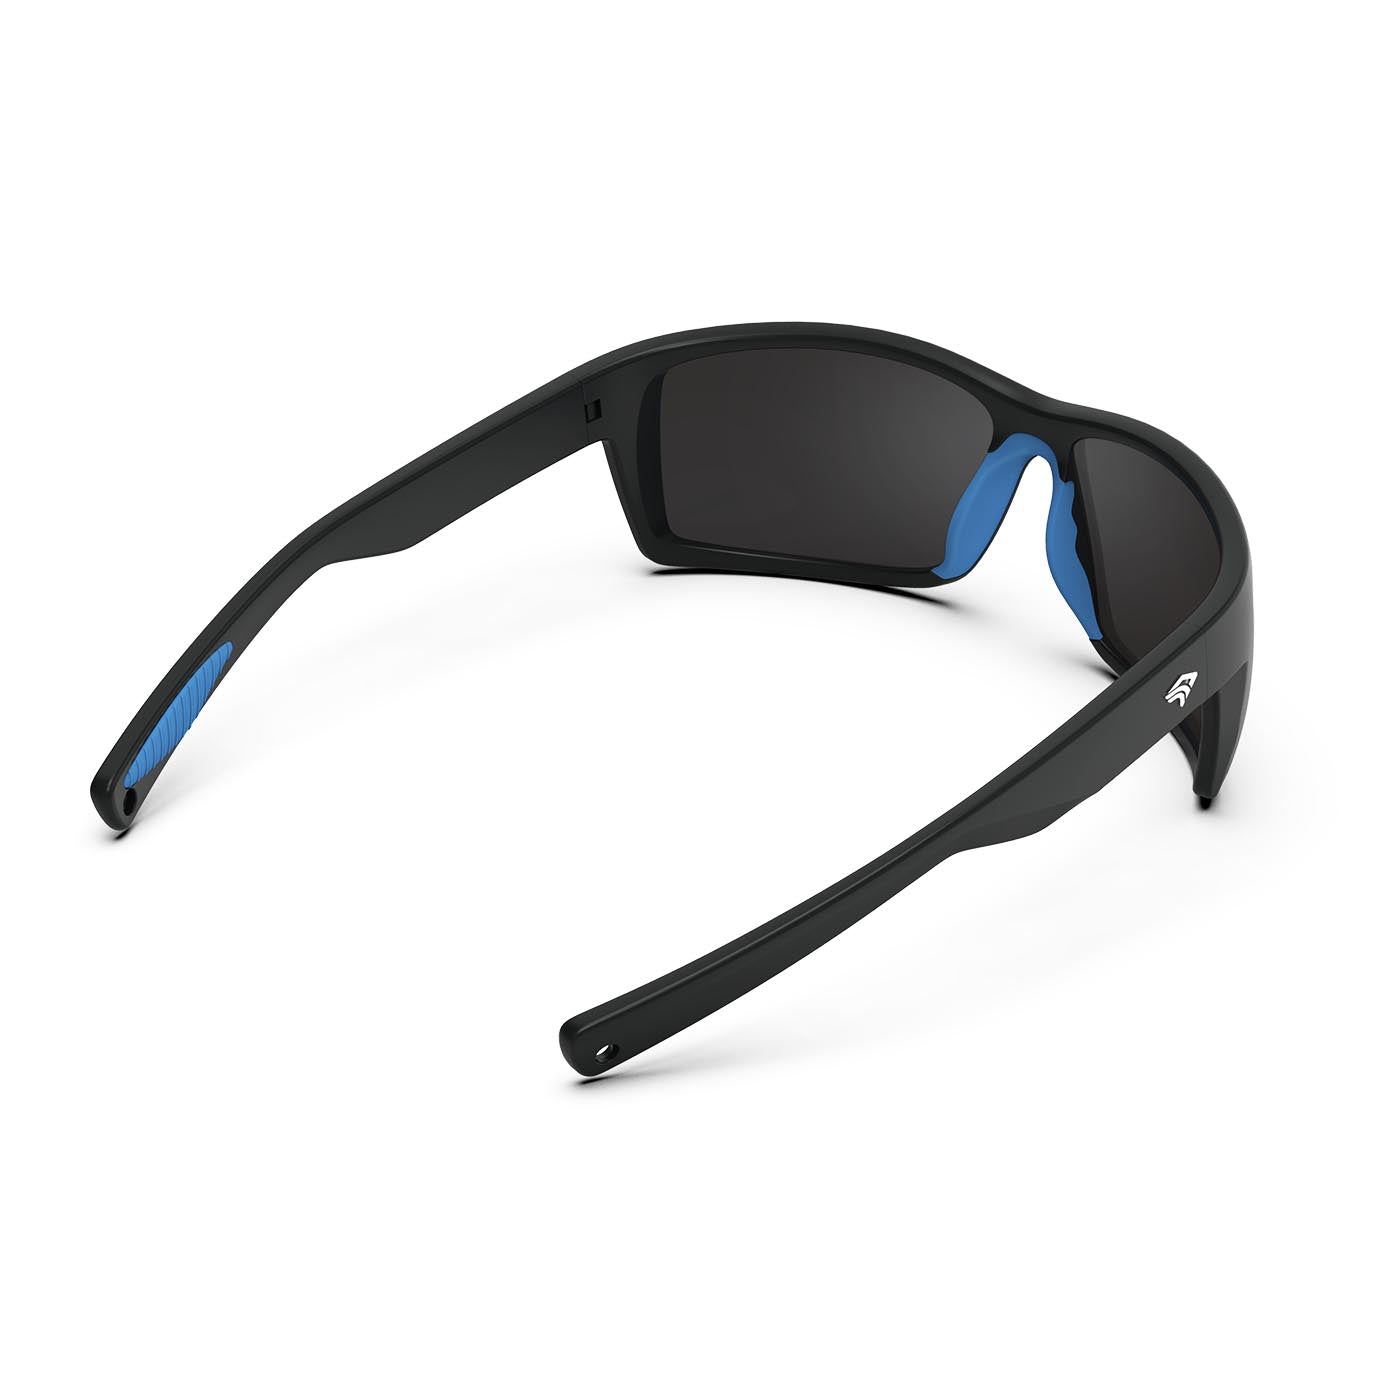 TOREGE Polarized Sports Sunglasses for Men and Women Cycling